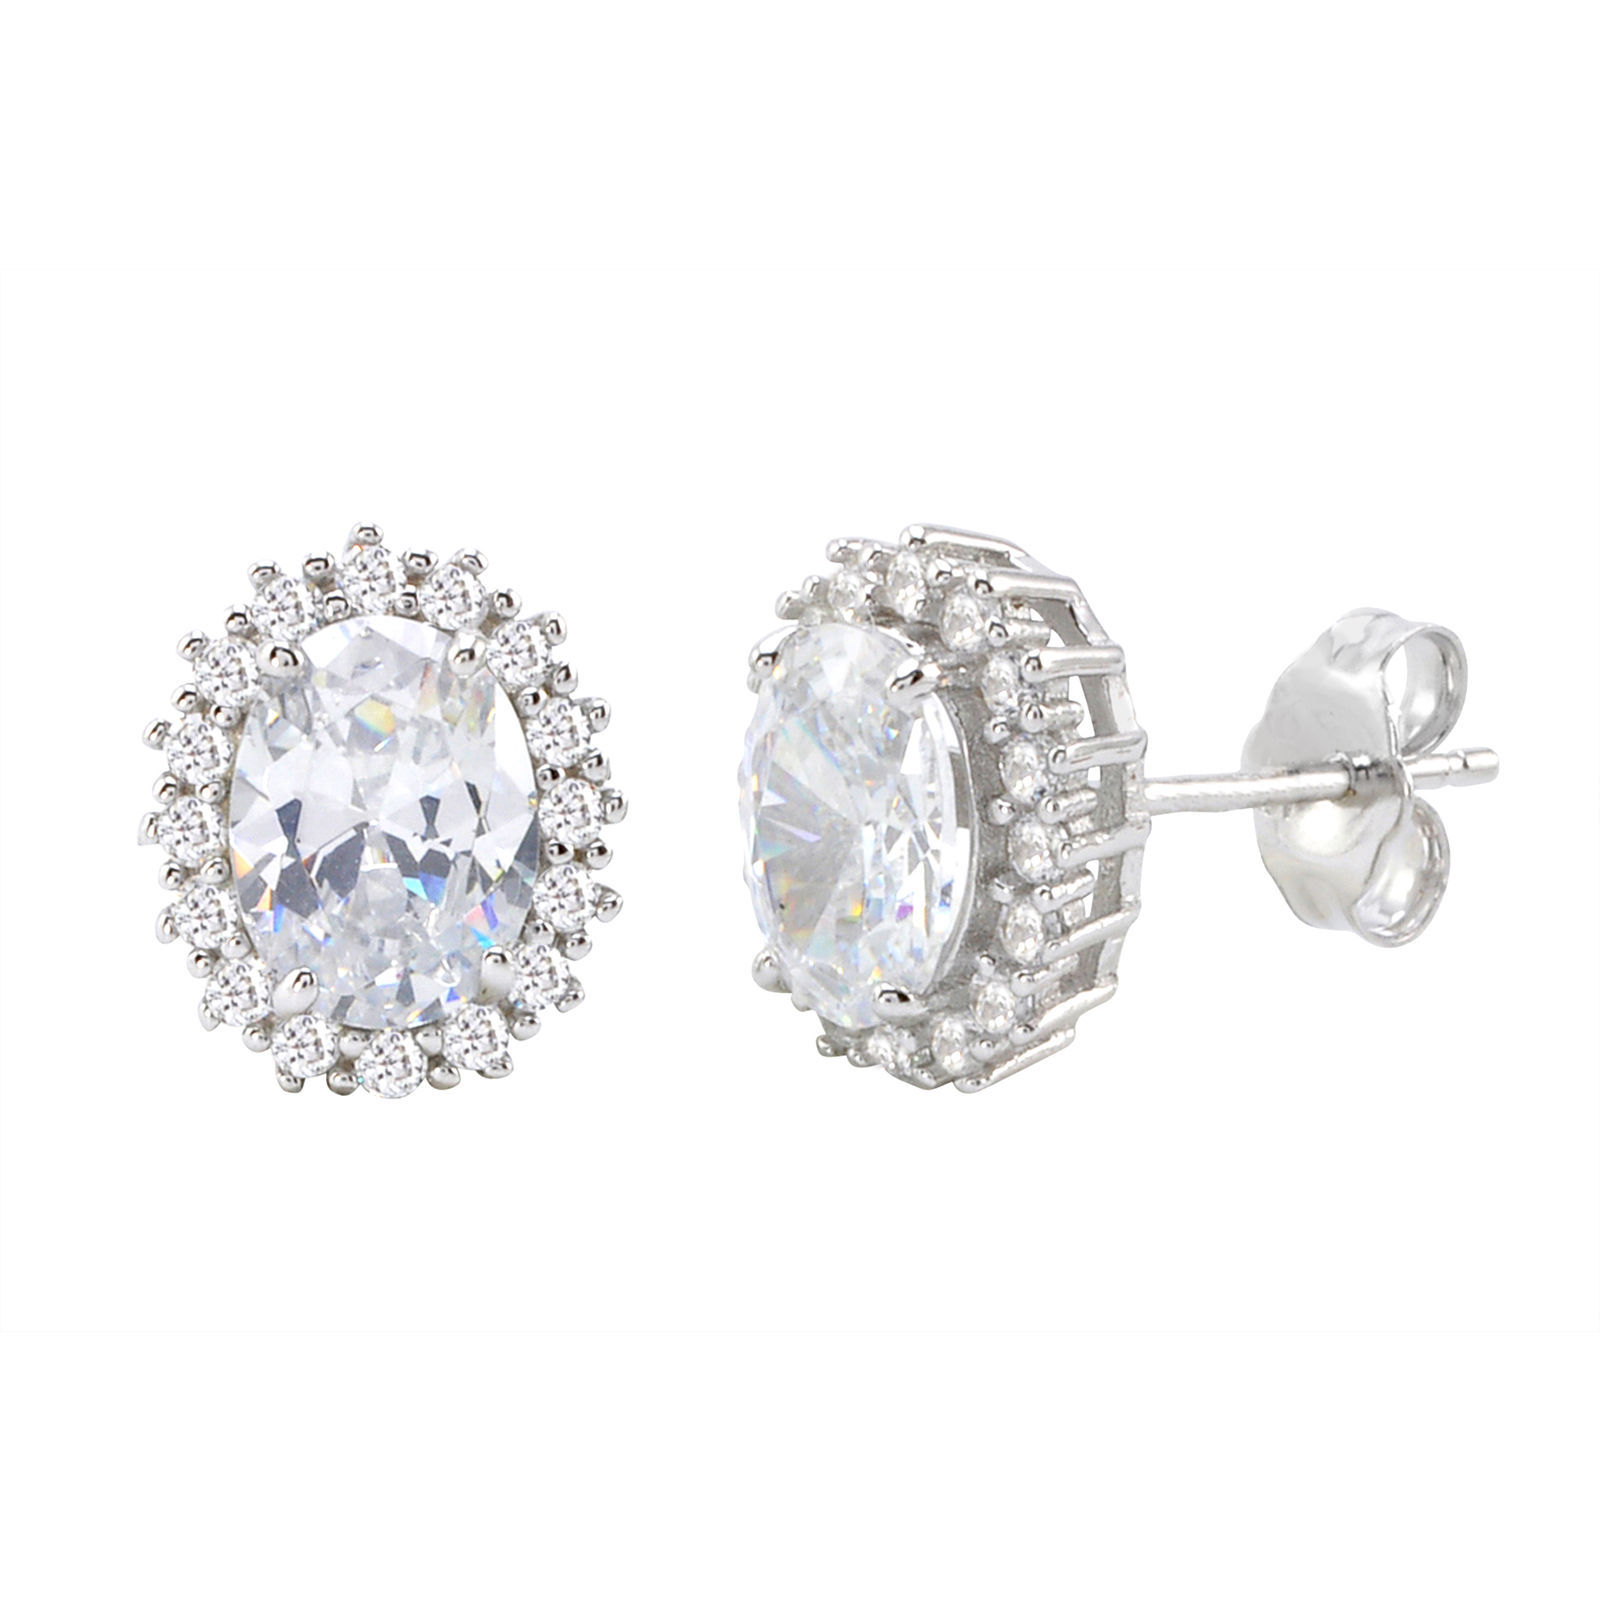 Sterling Silver Halo Oval Cubic Zirconia Stud Earrings Micropave 11mm x 10mm - $22.11